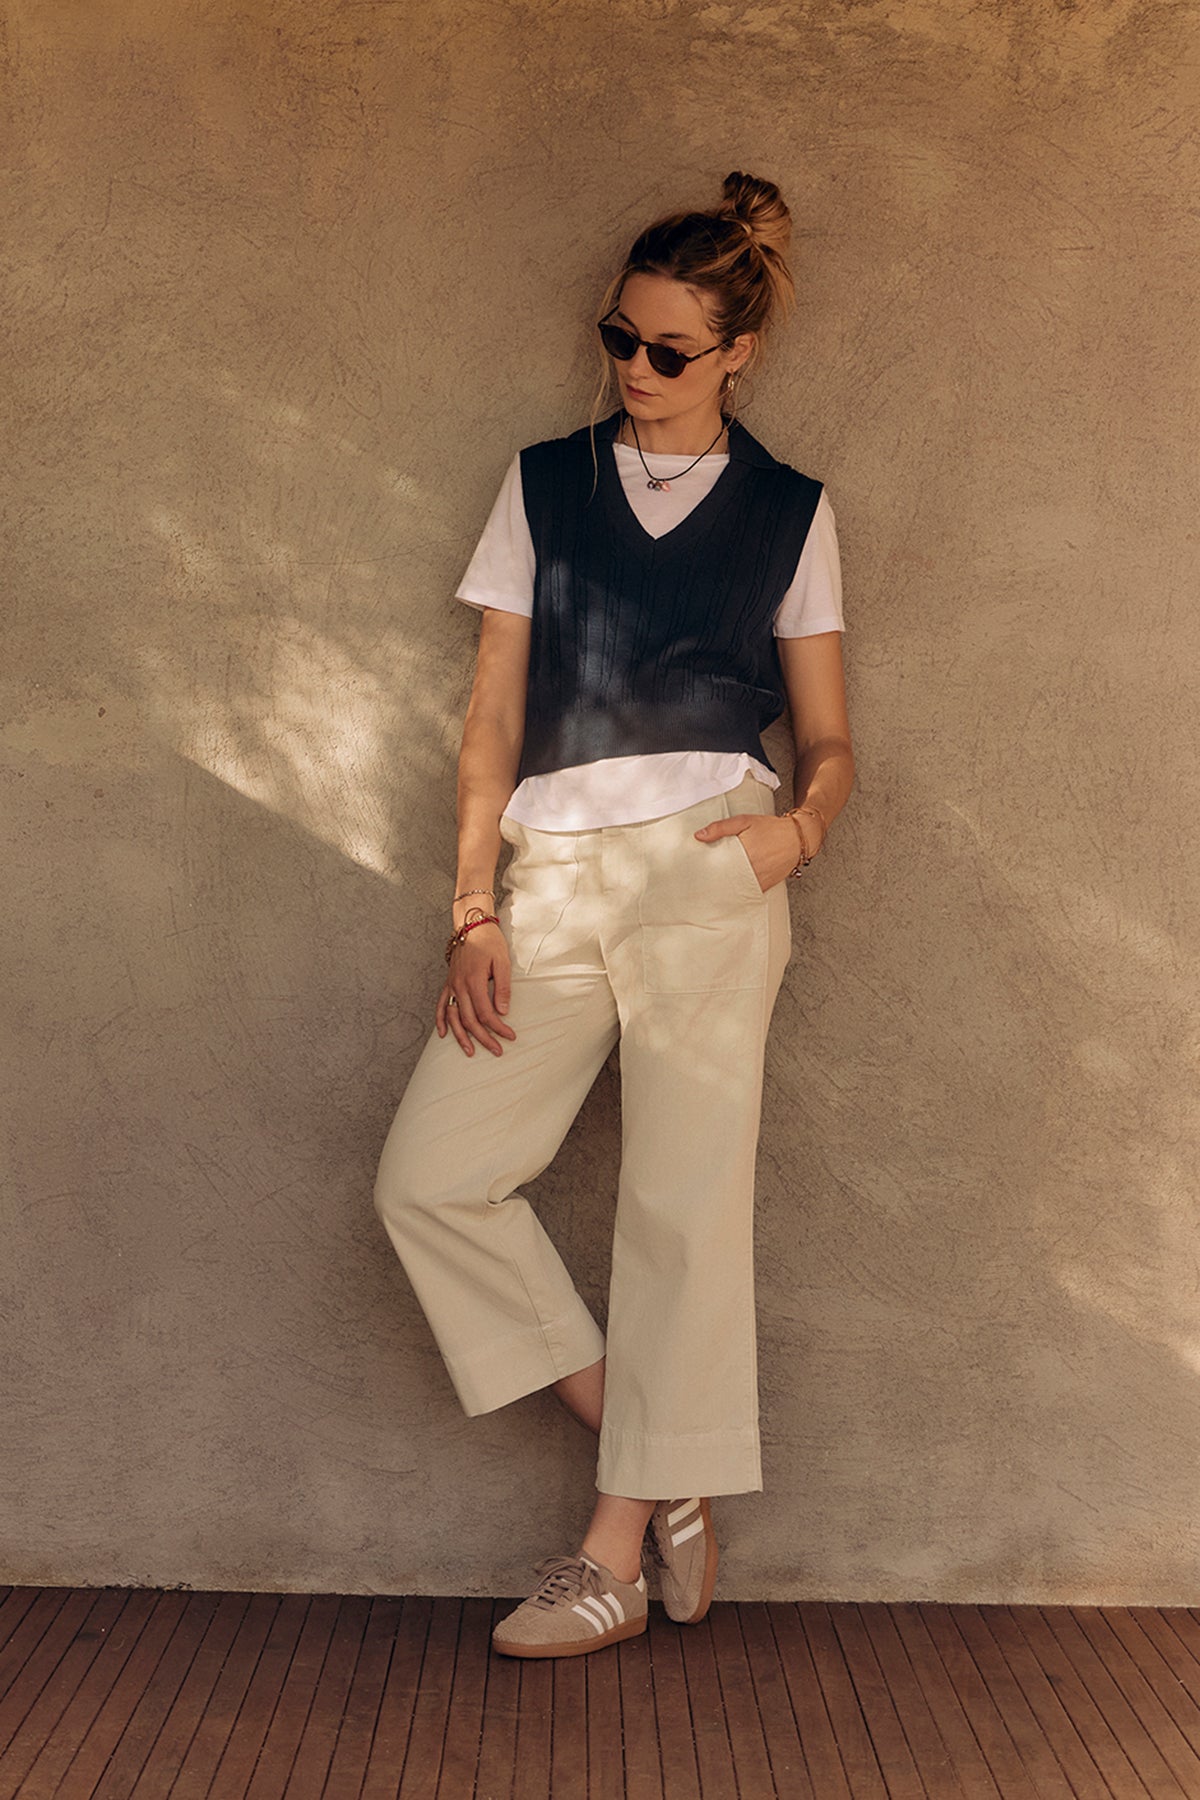 A stylish woman in sunglasses, a black vest, white shirt, and Velvet by Graham & Spencer MYA COTTON CANVAS PANT leans against a beige wall, hands in pockets.-37000812298433